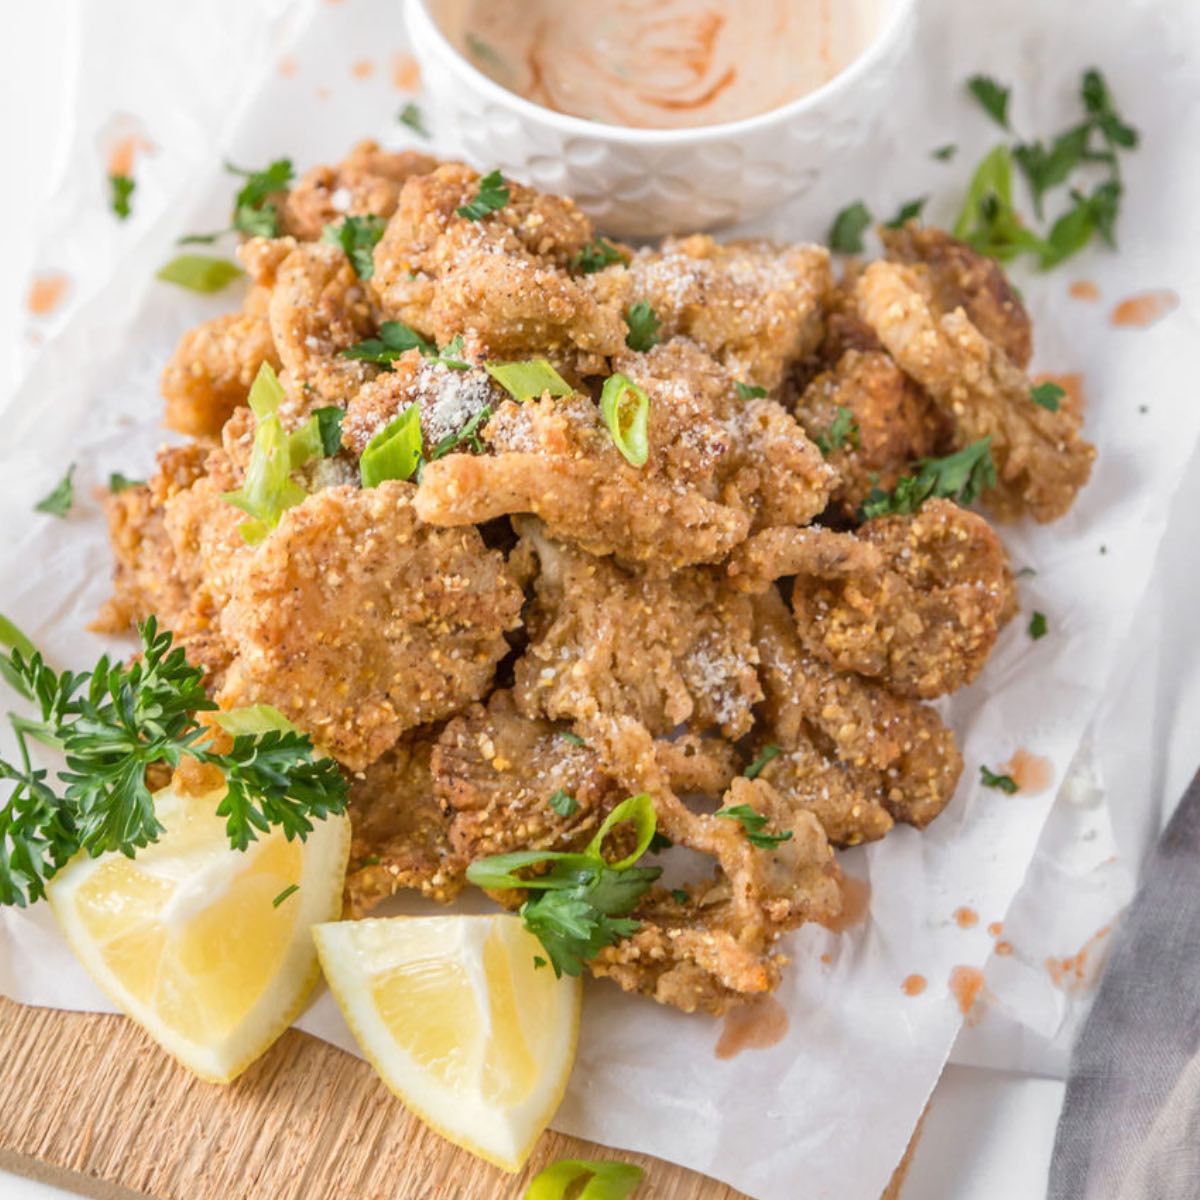 A pile of fried vegan chicken on a plate garnished with parsley and lemon.